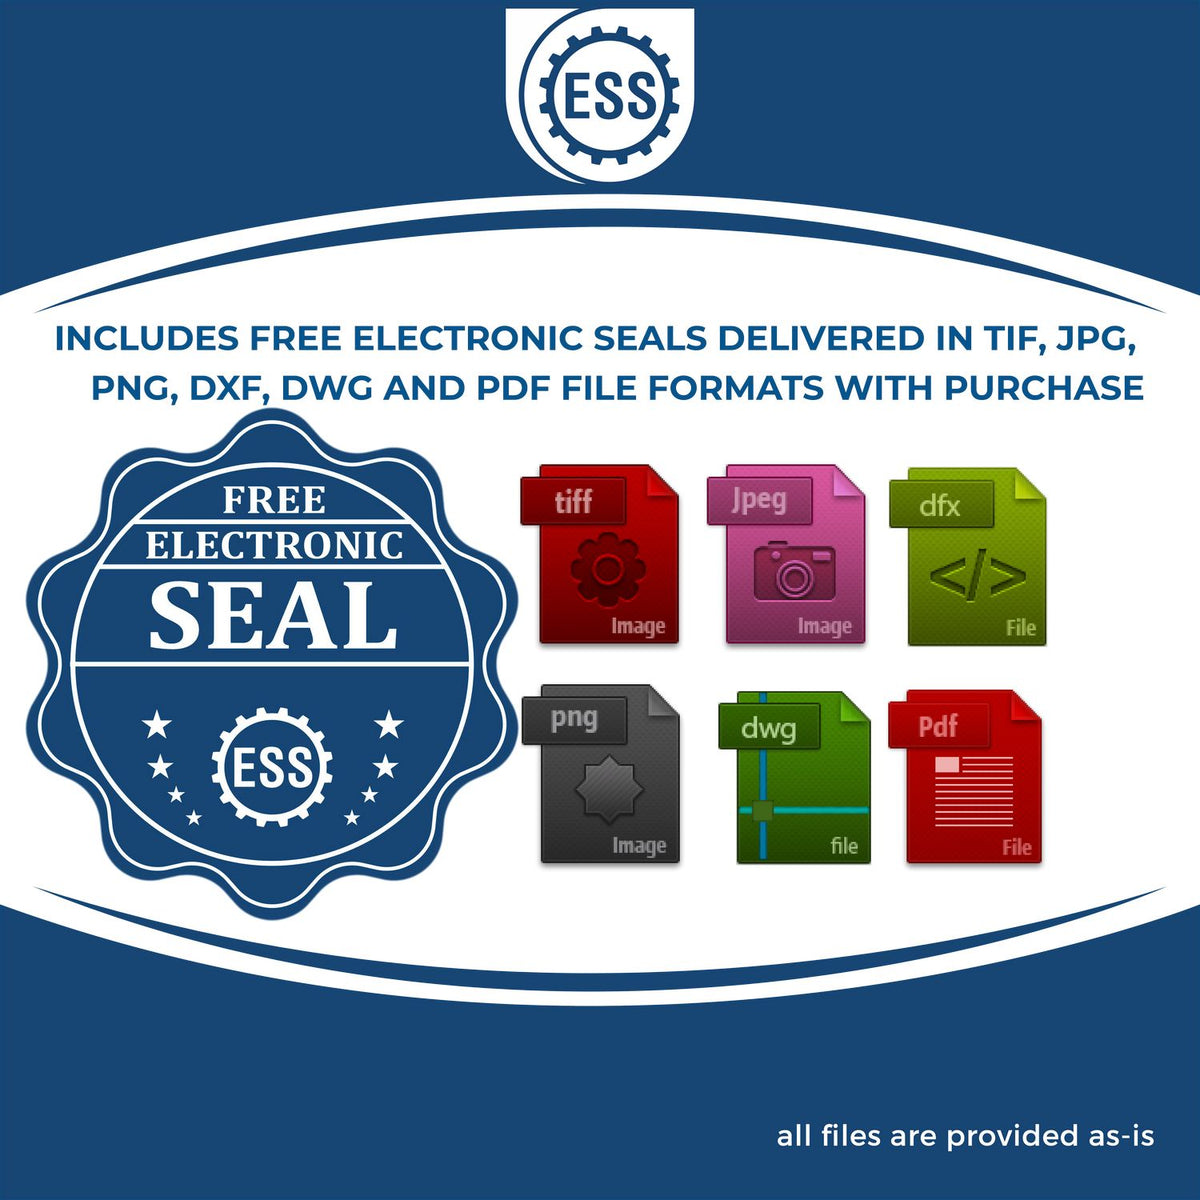 An infographic for the free electronic seal for the Gift Montana Engineer Seal illustrating the different file type icons such as DXF, DWG, TIF, JPG and PNG.